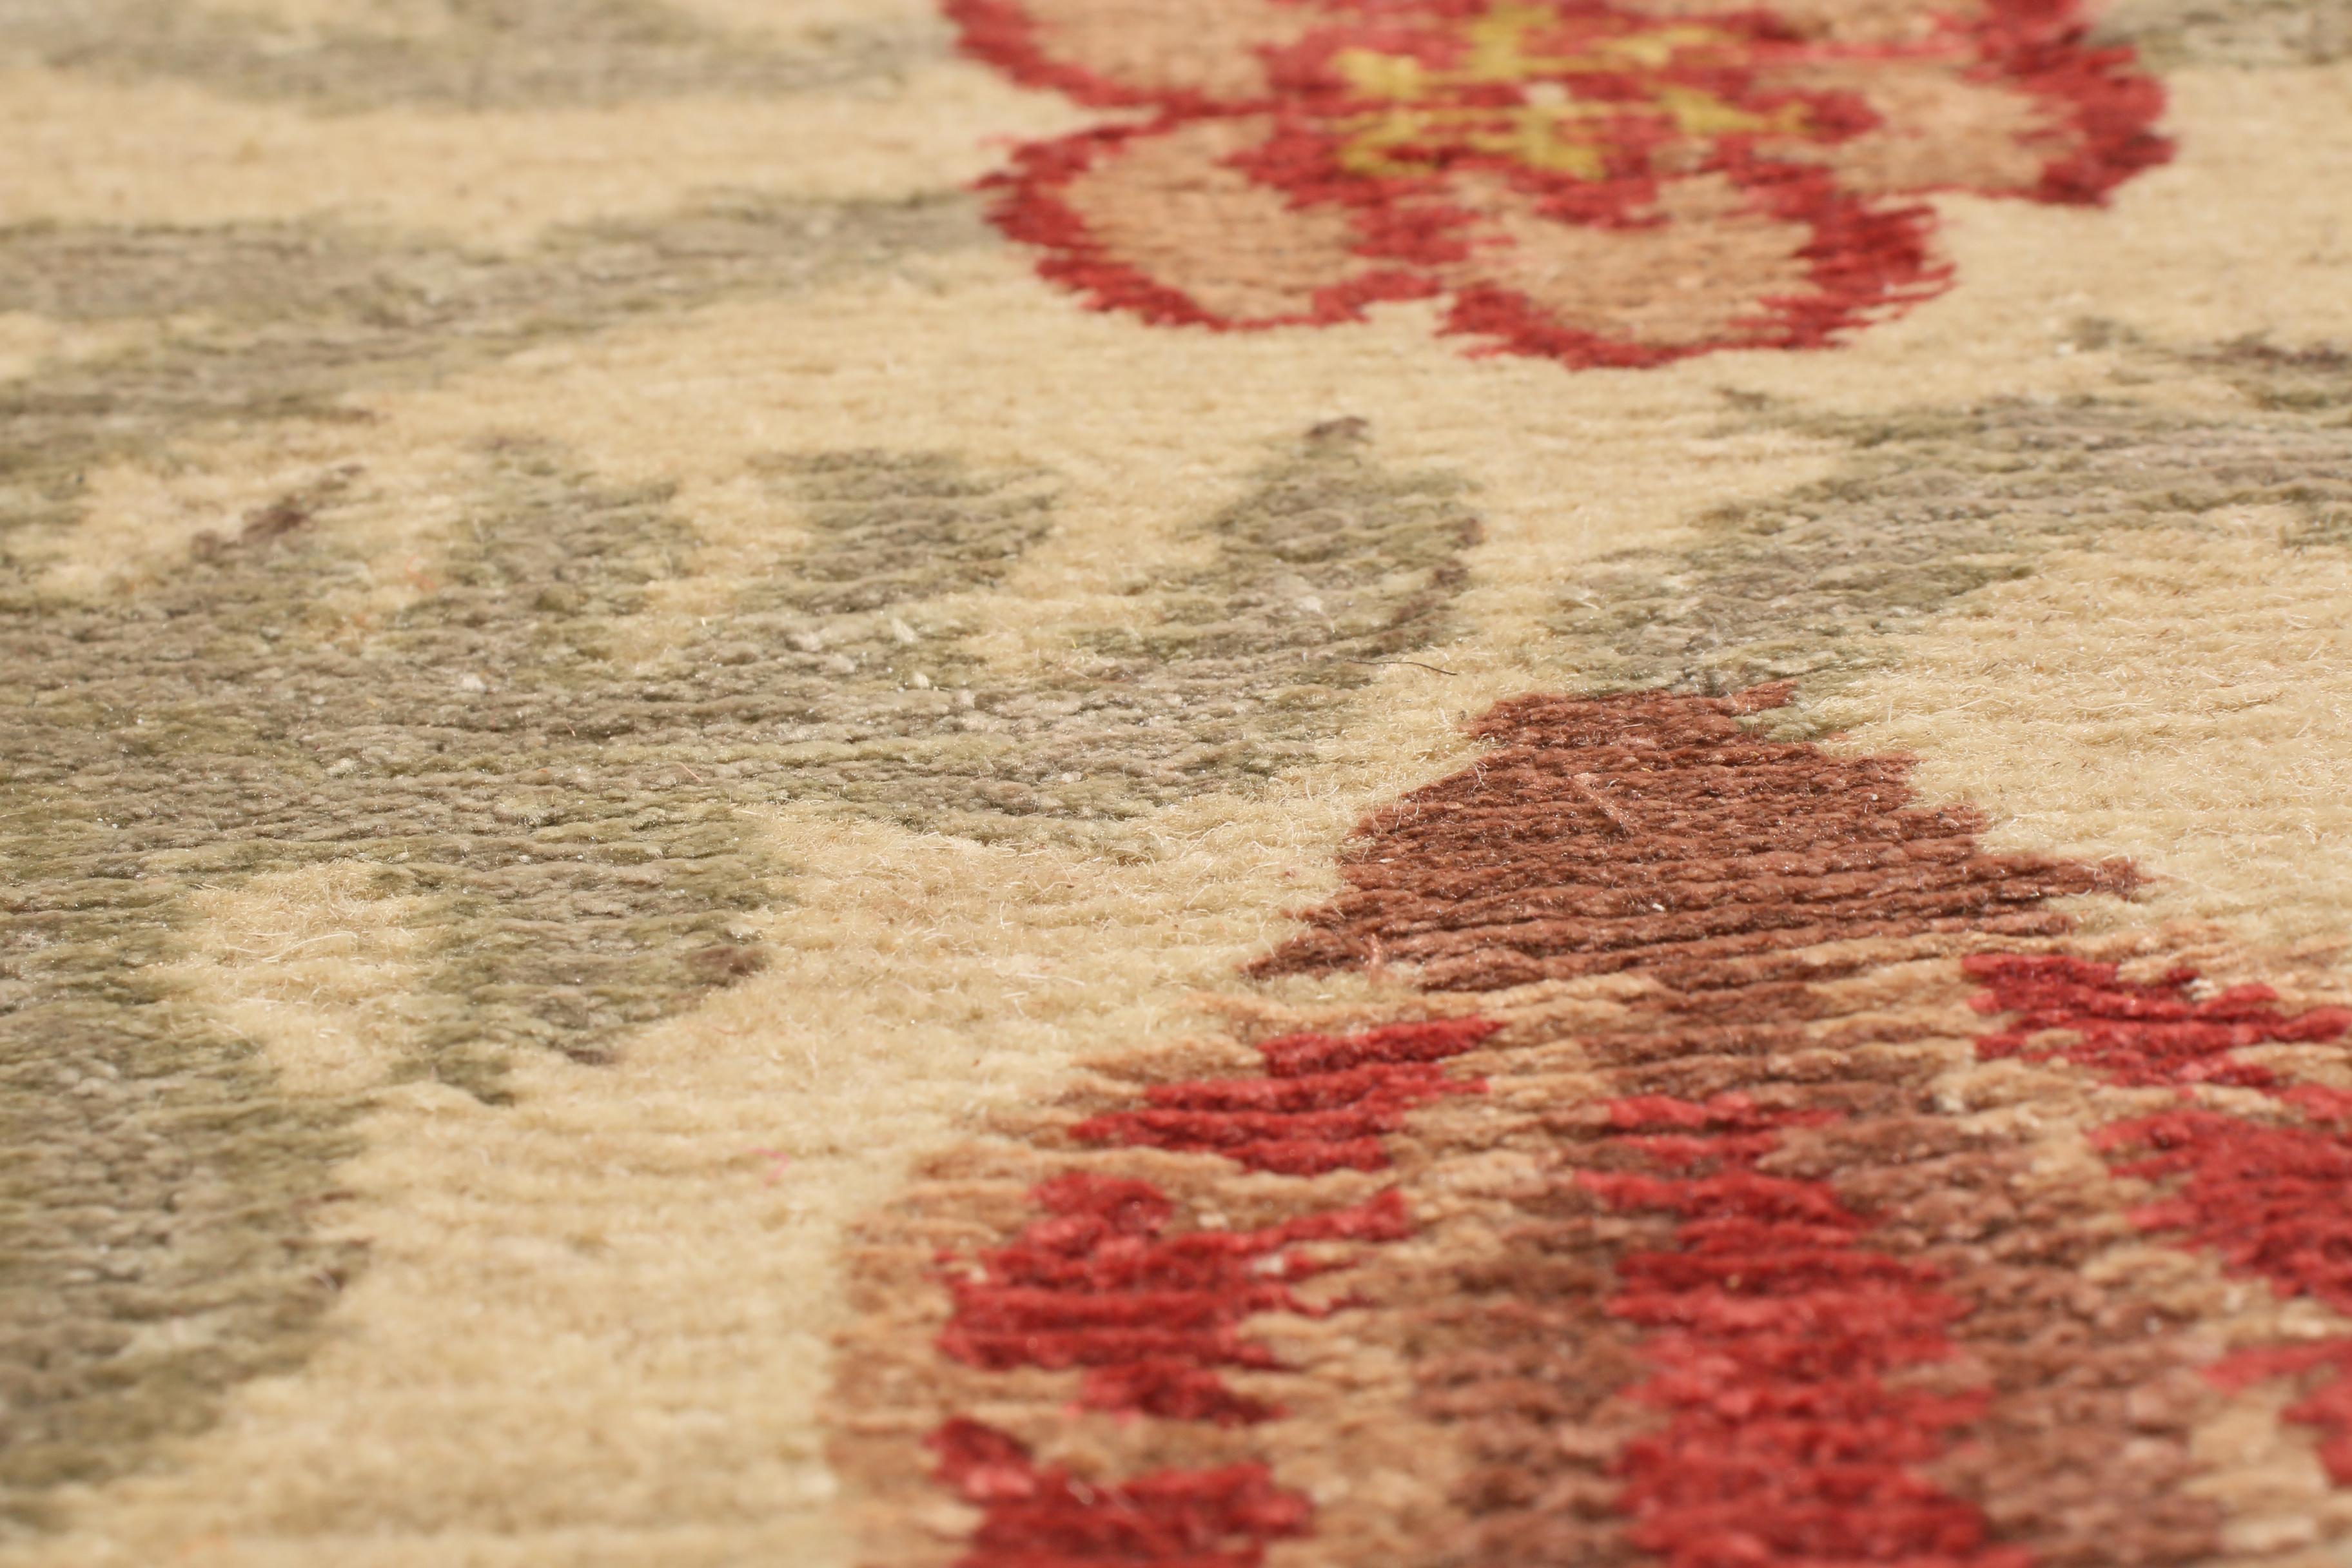 Rug & Kilim's Bilbao Spanish Design Beige Floral Wool-Silk Runner In New Condition For Sale In Long Island City, NY